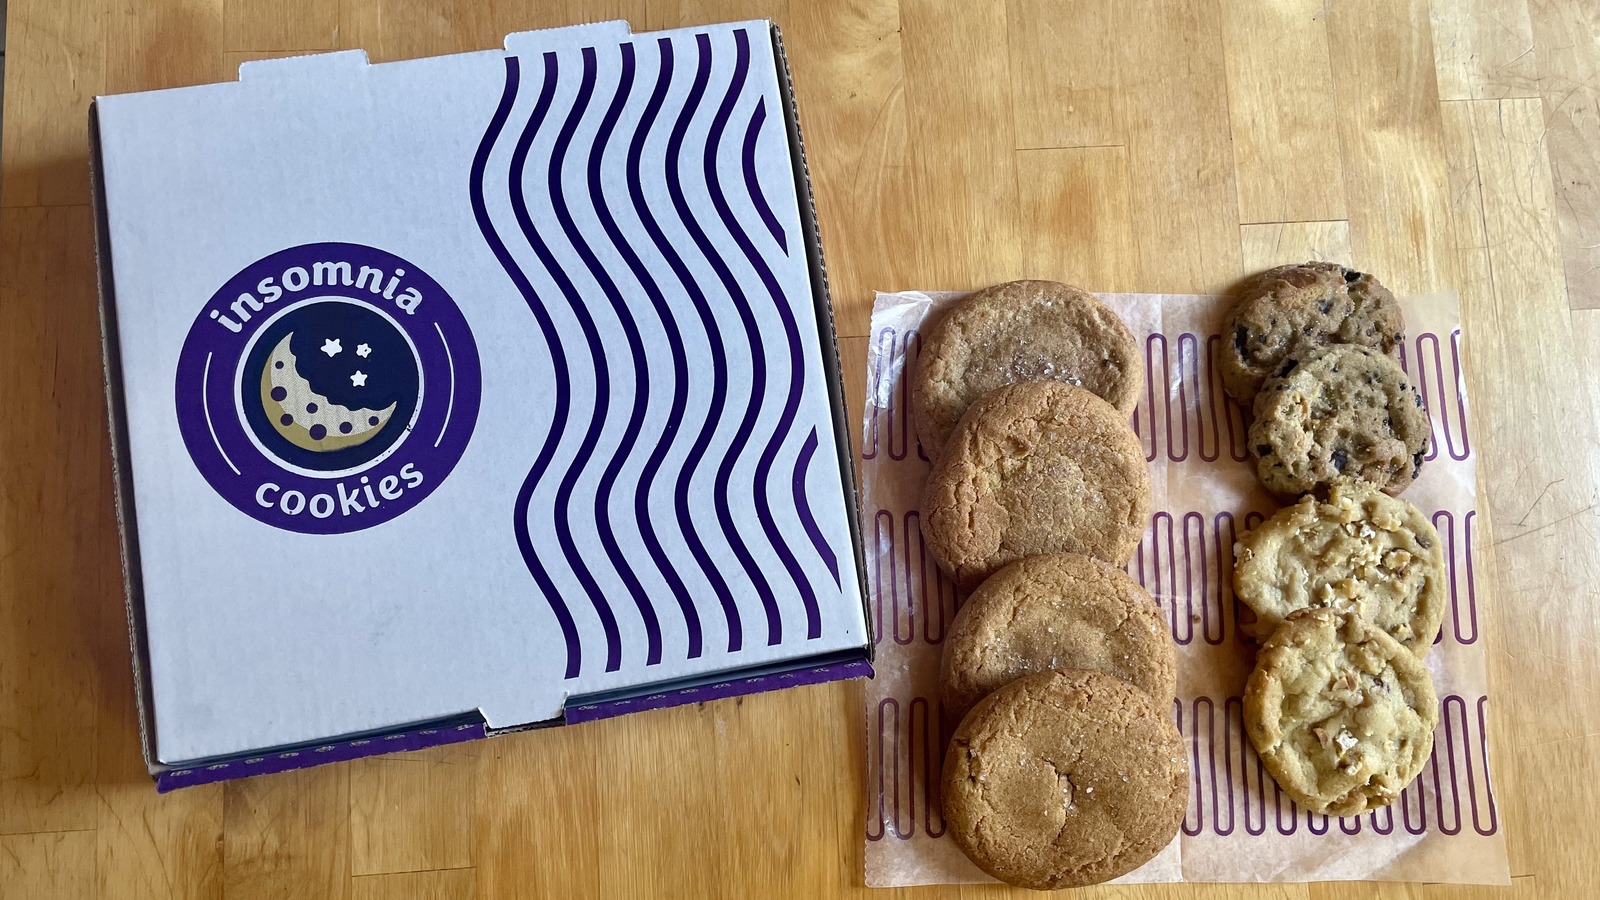 https://www.mashed.com/img/gallery/we-tried-insomnia-cookies-new-state-fair-inspired-collection-heres-how-it-went/l-intro-1654889200.jpg